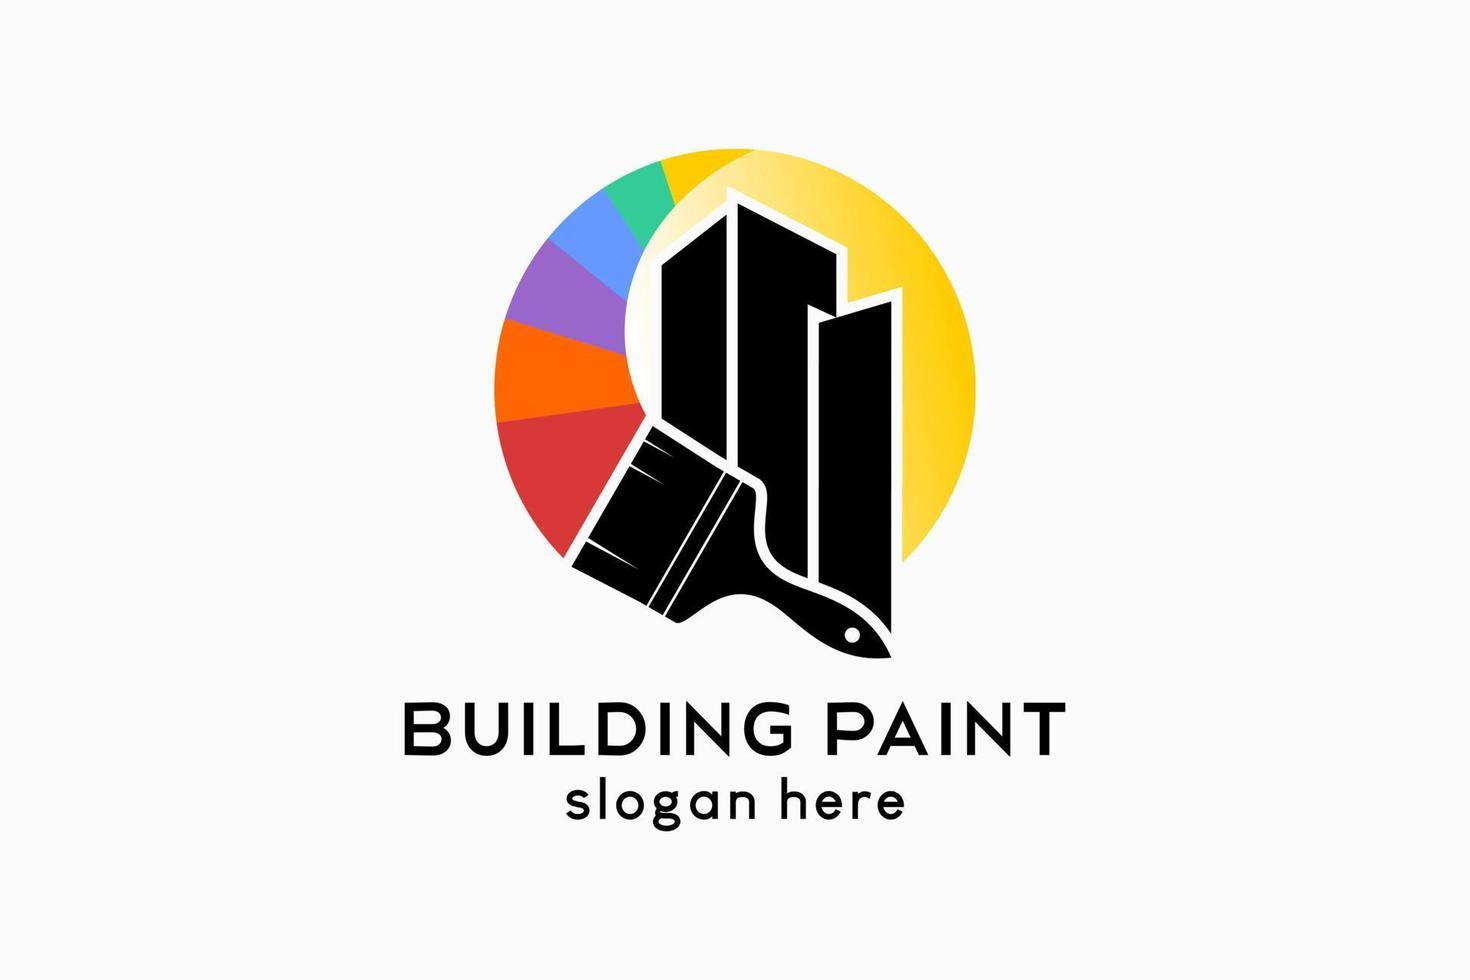 Logo design for wall paint or building paint, a paint brush silhouette combined and a building icon with a rainbow color concept in dots or sun vector